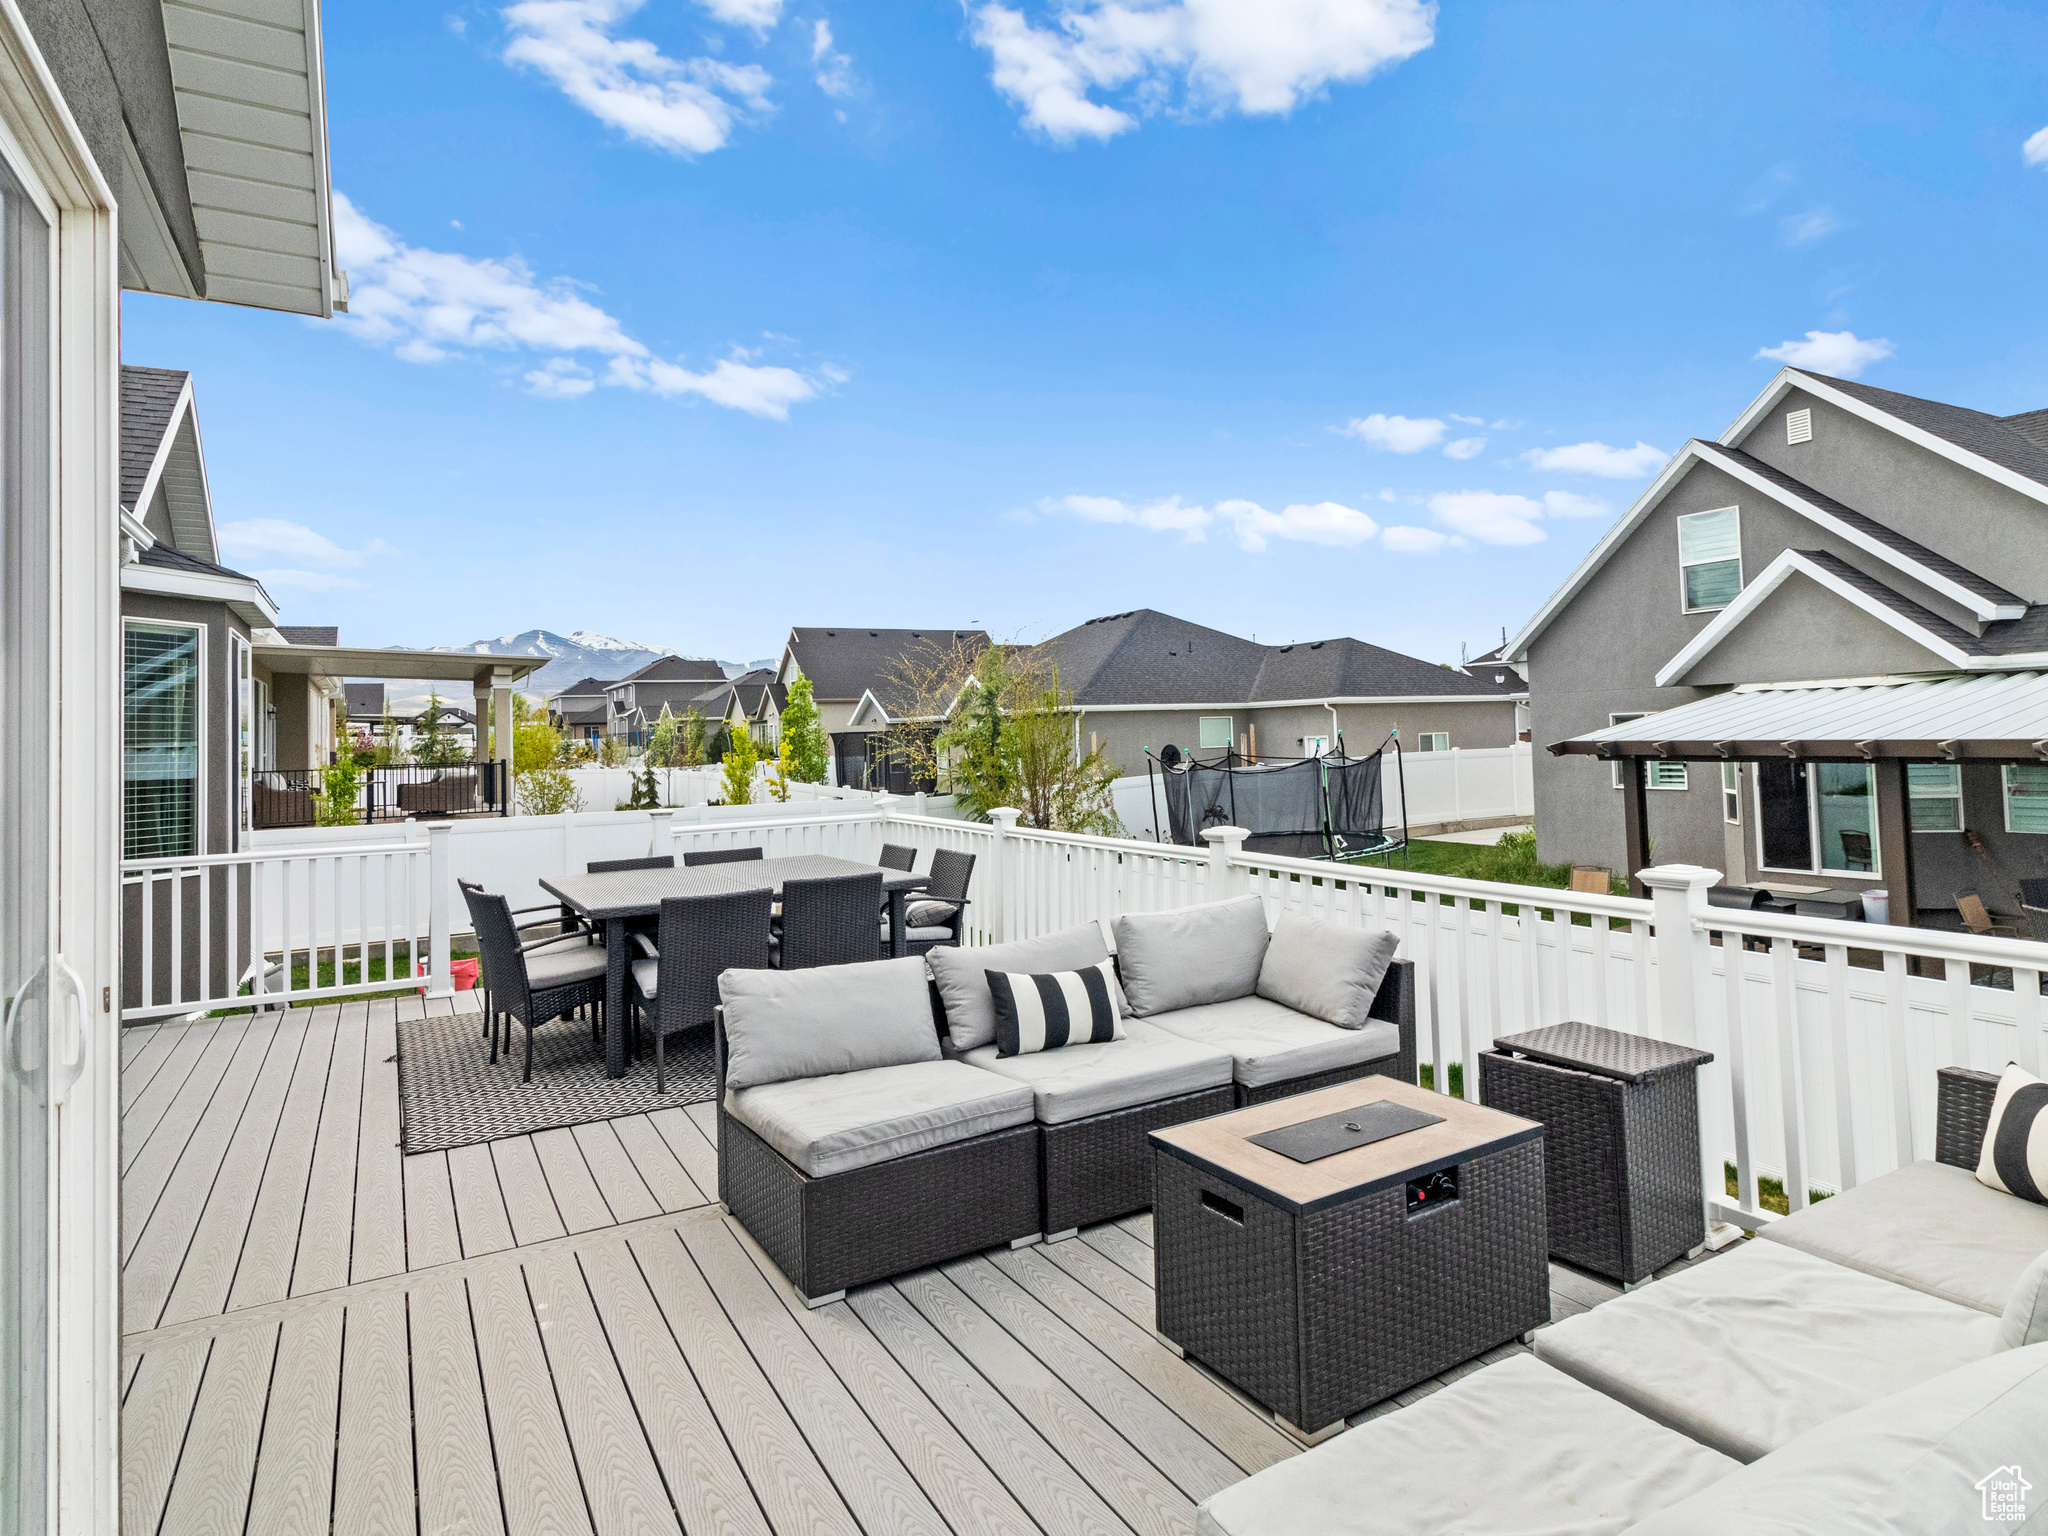 Deck with an outdoor living space